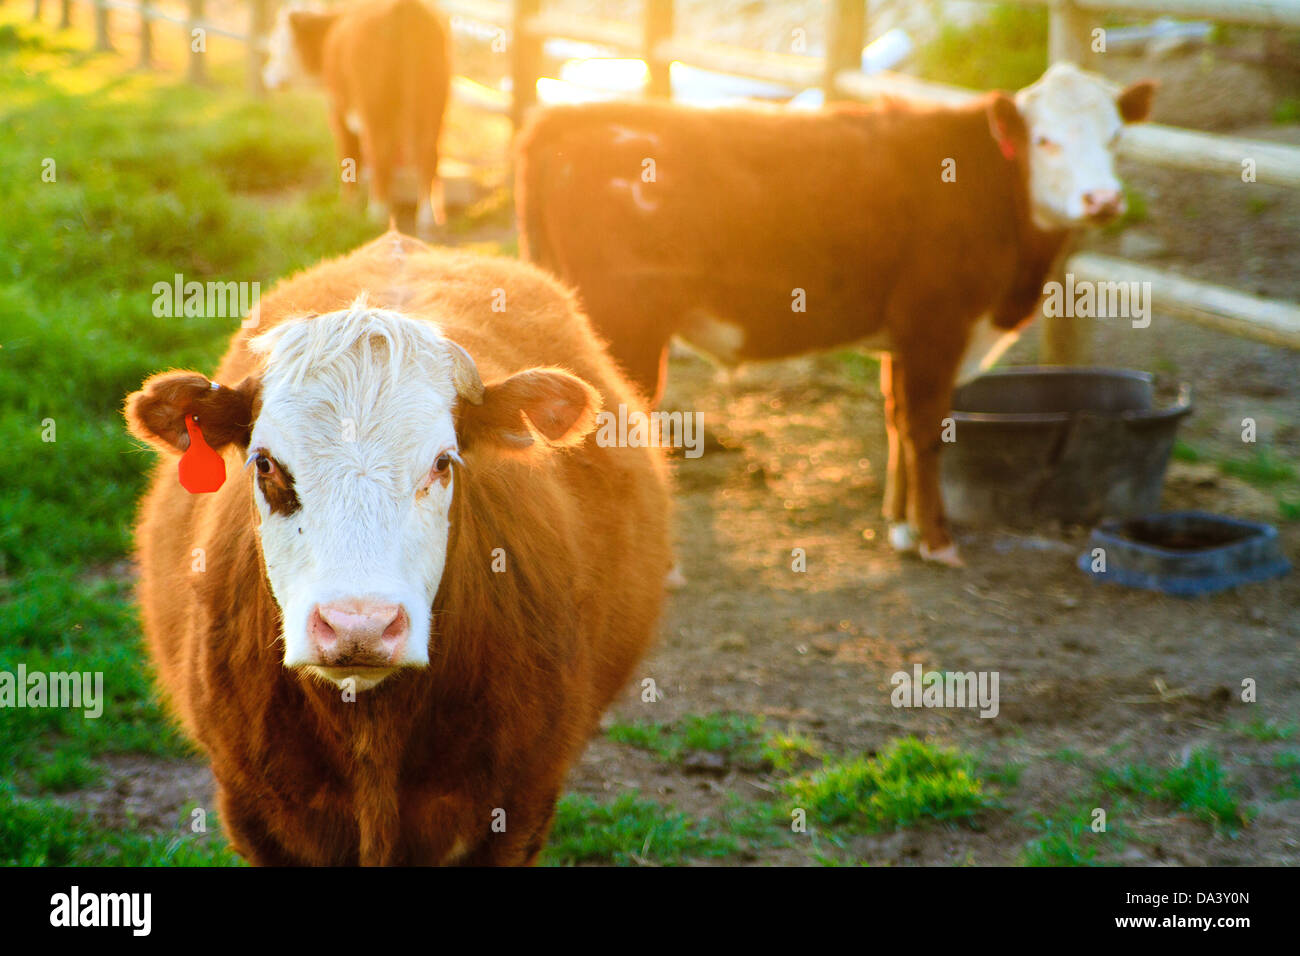 Three golden-brown cows with white faces in field by rustic wooden fence, bathed in golden evening light in rural Idaho Stock Photo